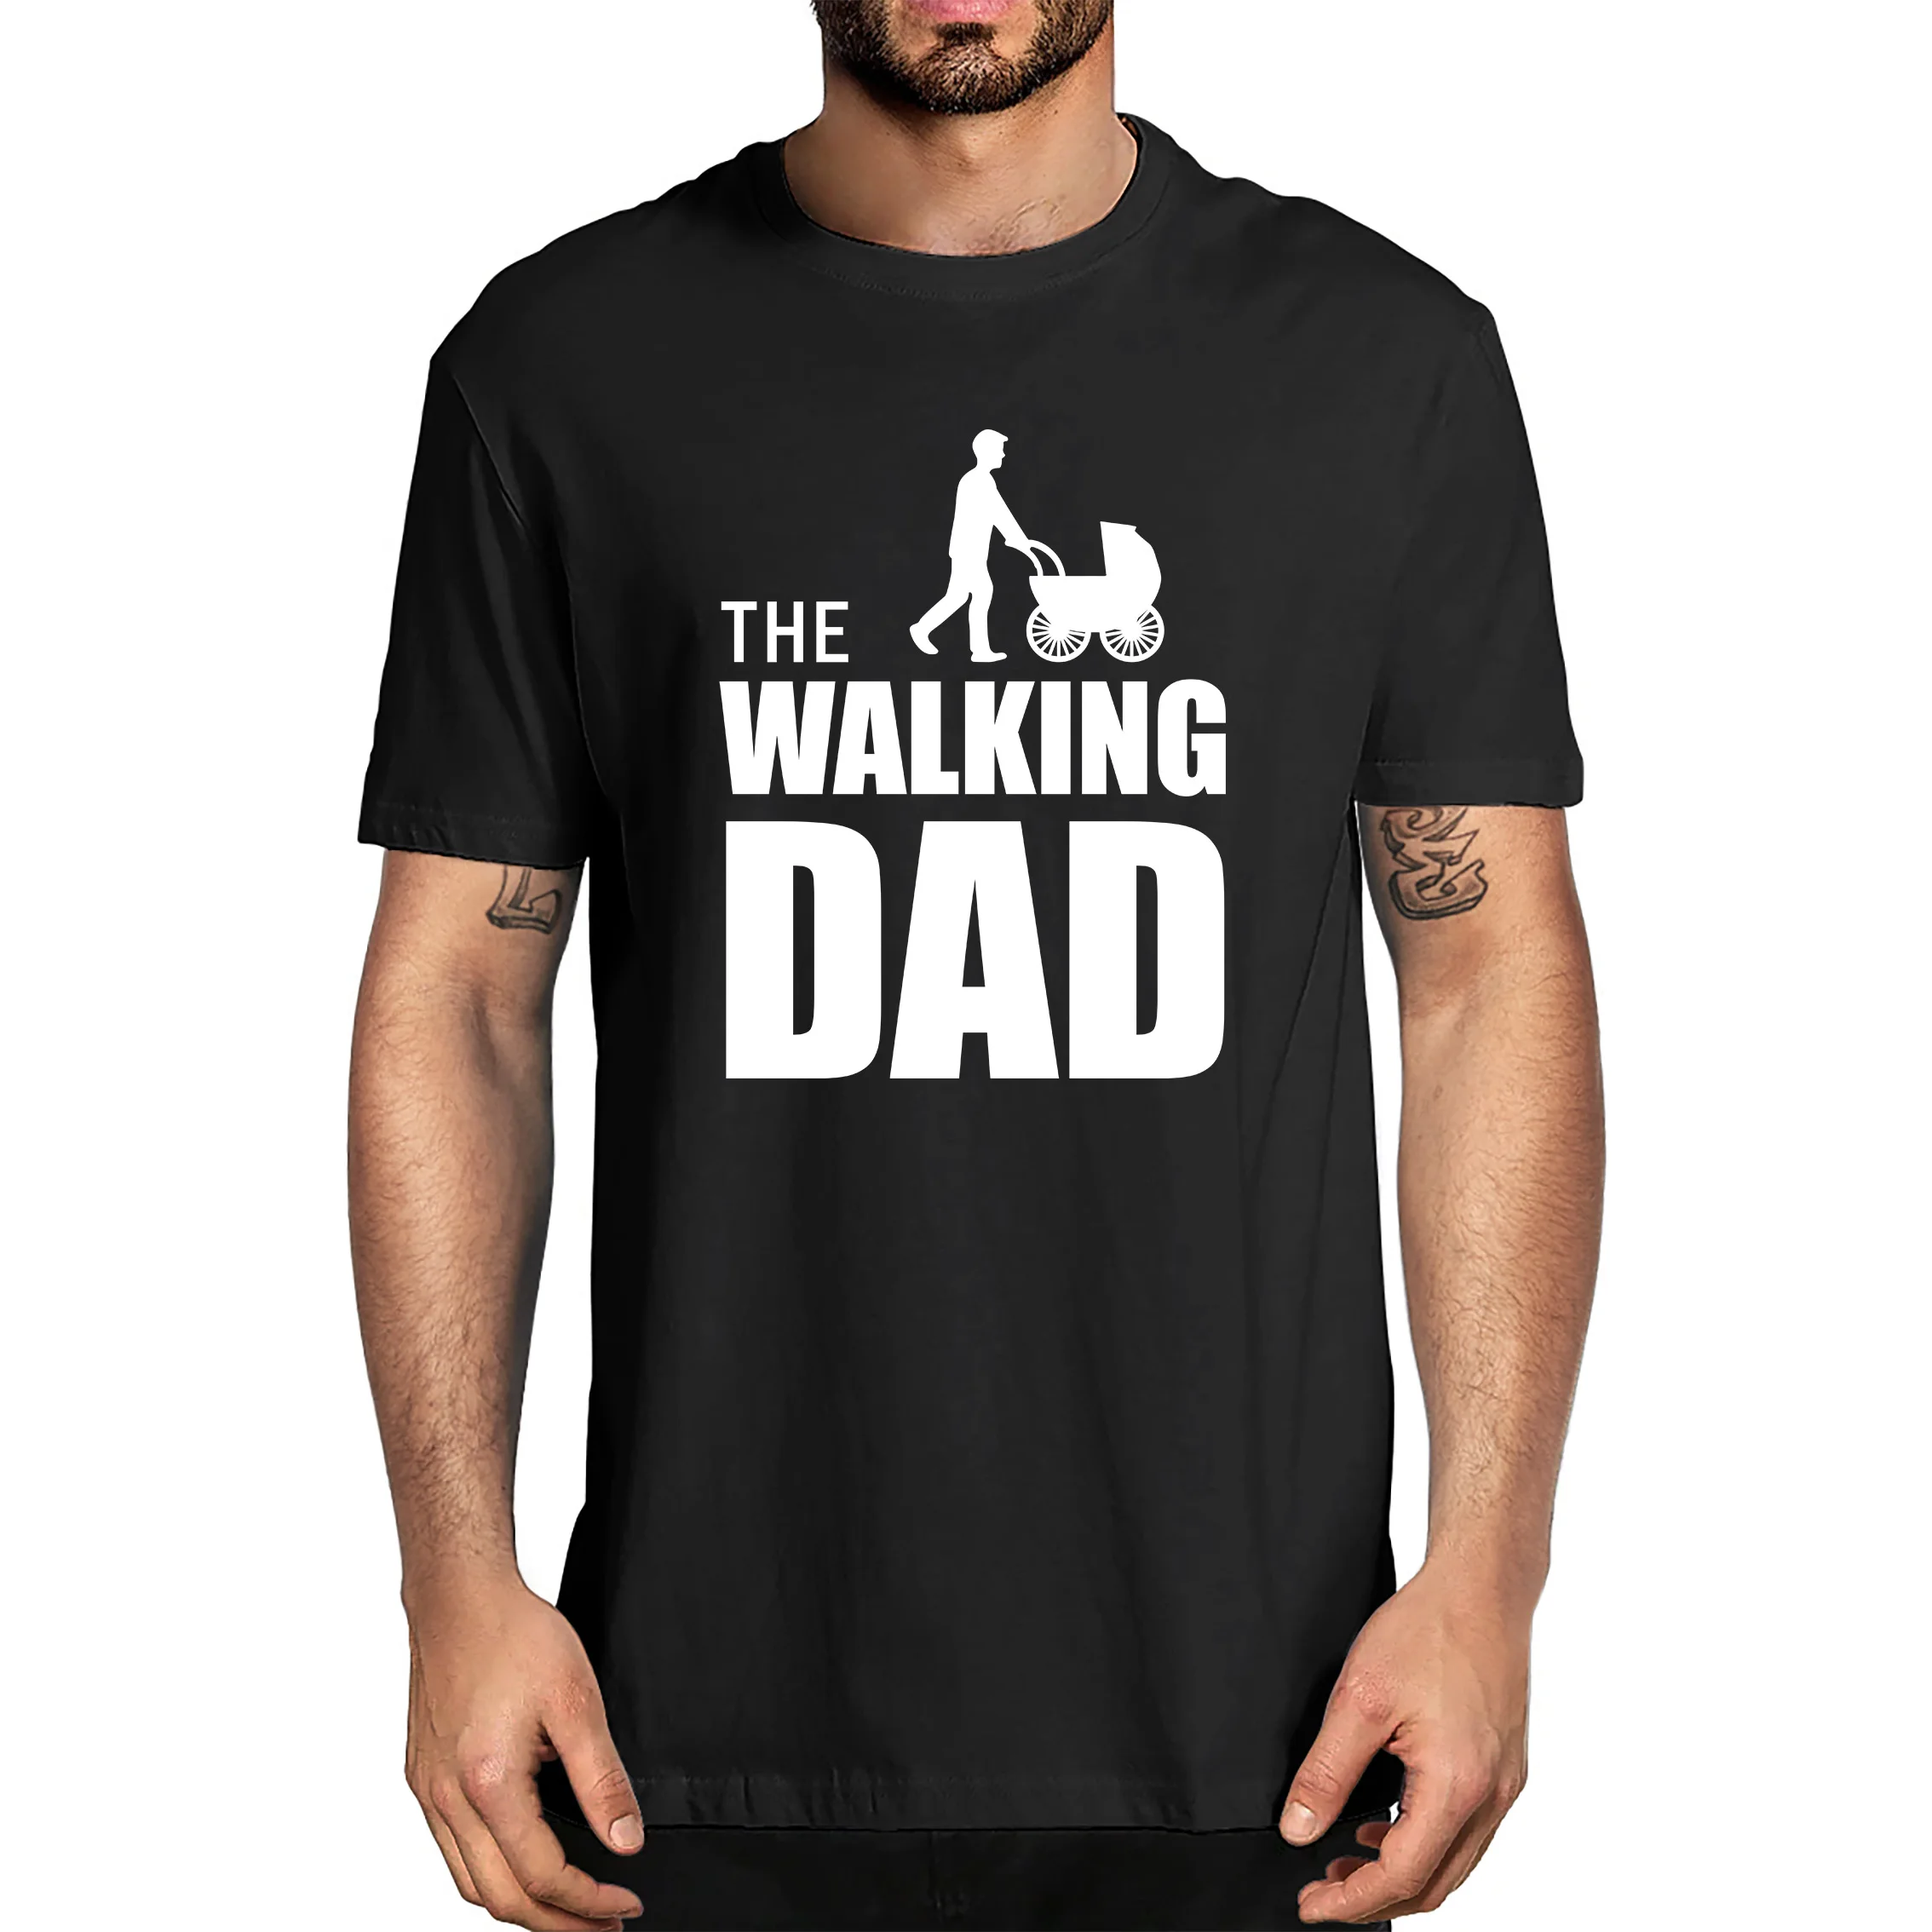 

Unisex The Walking Dad Baby Carriage Tshirt Funny Retro Black Father's Day Men's 100% Cotton Novelty T-Shirt Streetwear Soft Tee